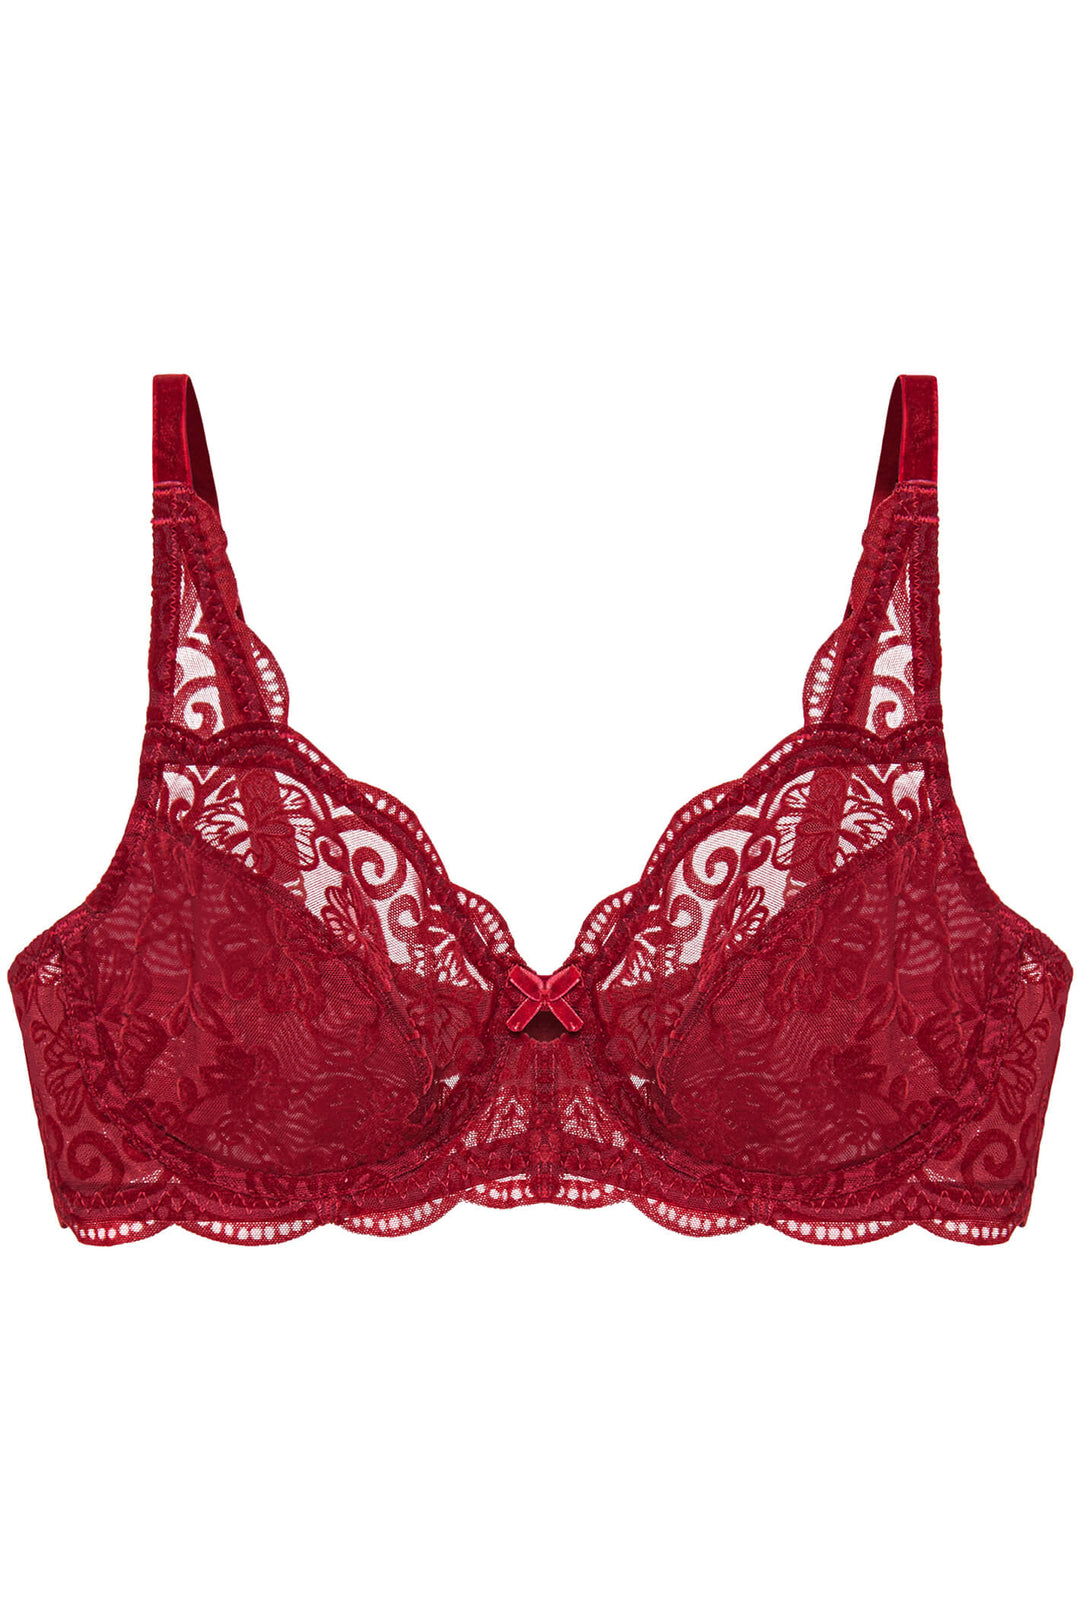 Buy Cukoo Lacy Panty-Red online